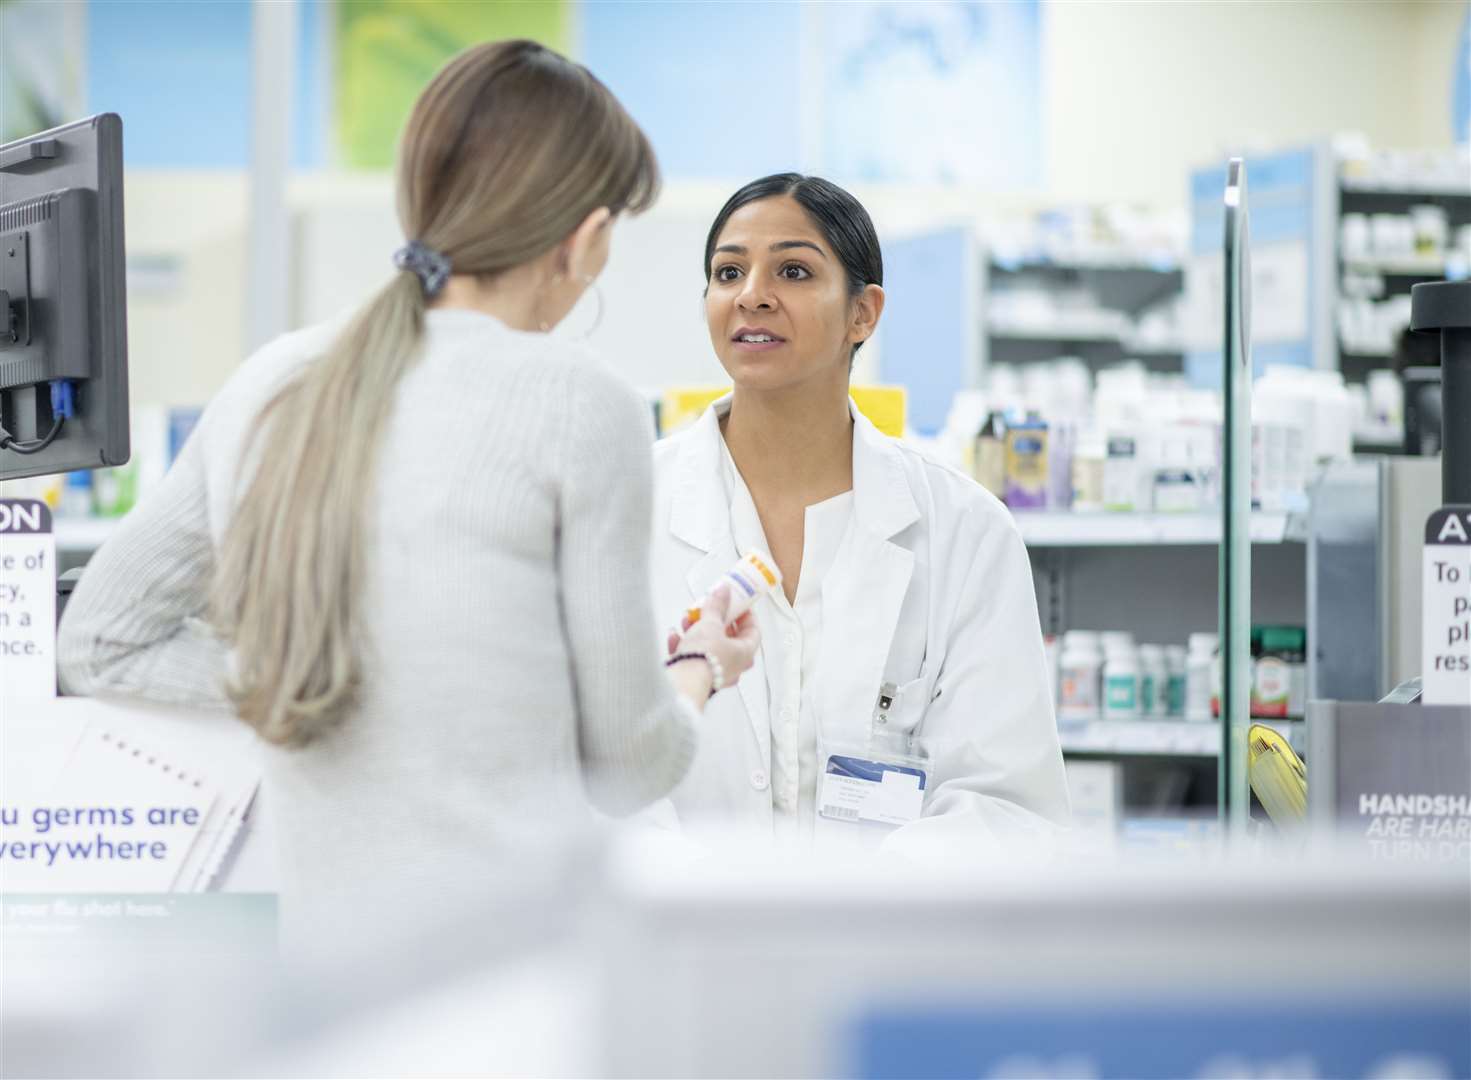 Certificates can be brought from pharmacies, online or over the phone. Image: stock photo.